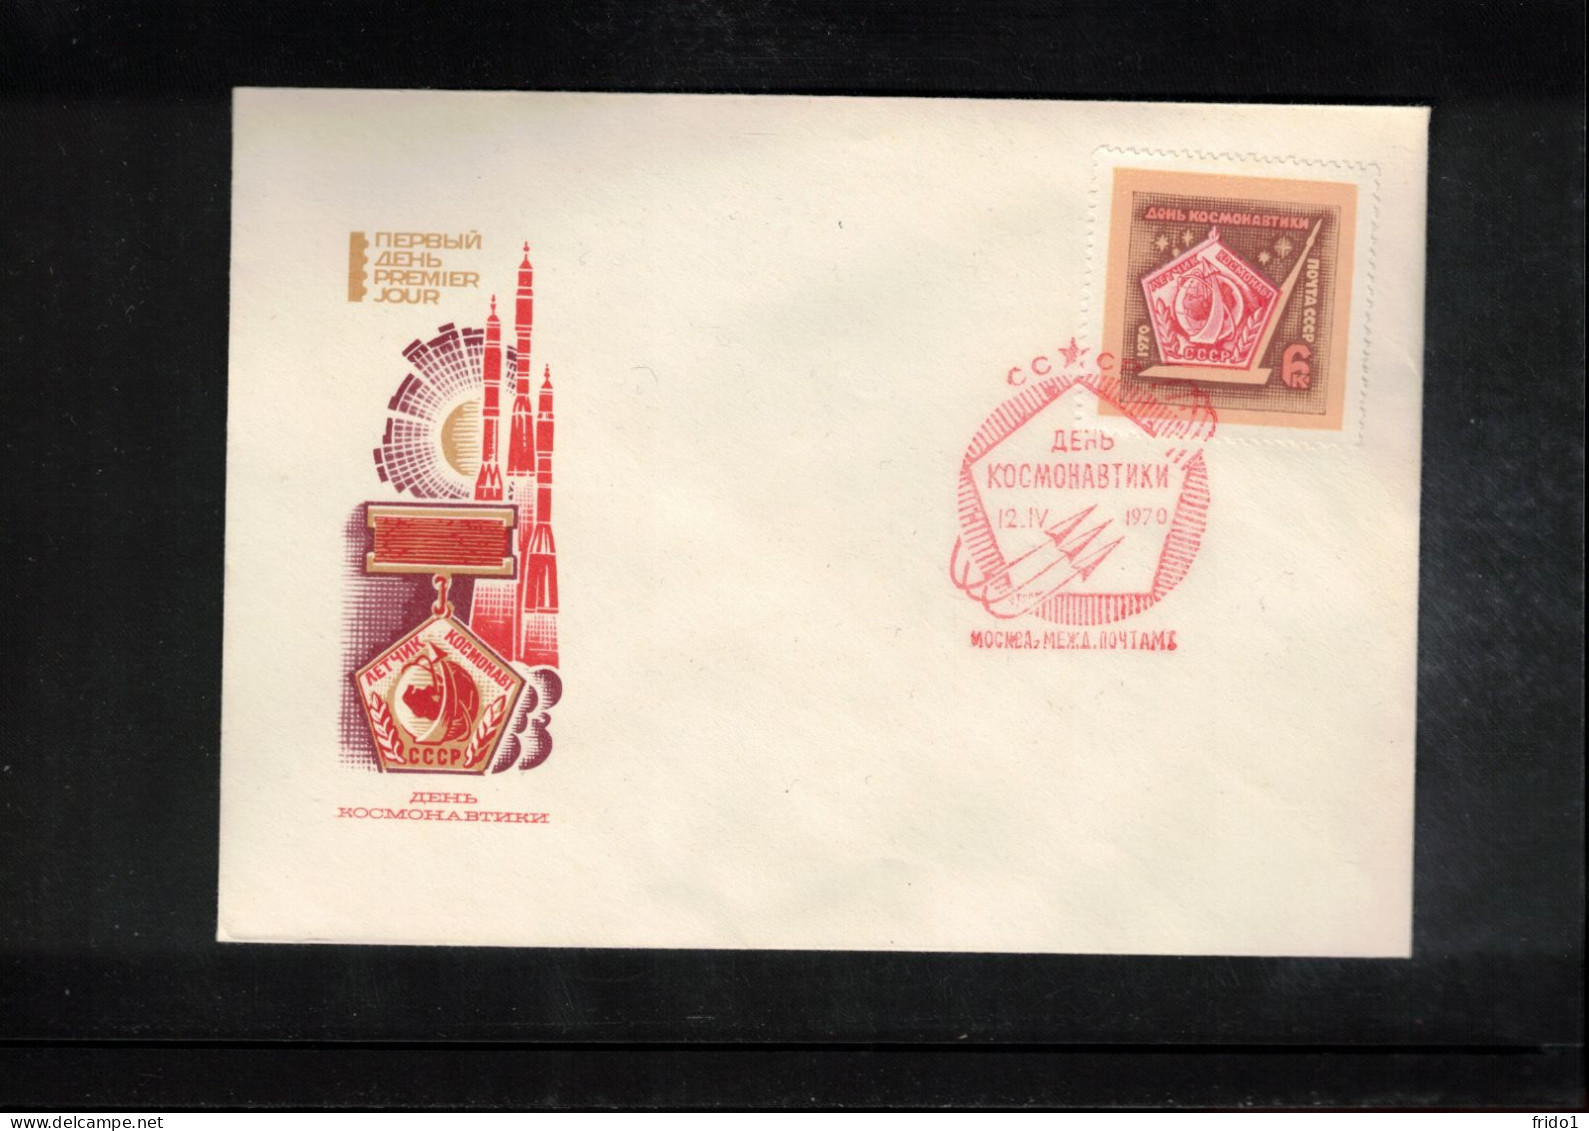 Russia USSR 1970 Space / Weltraum Cosmonaut's Day Interesting Cover - Russia & USSR